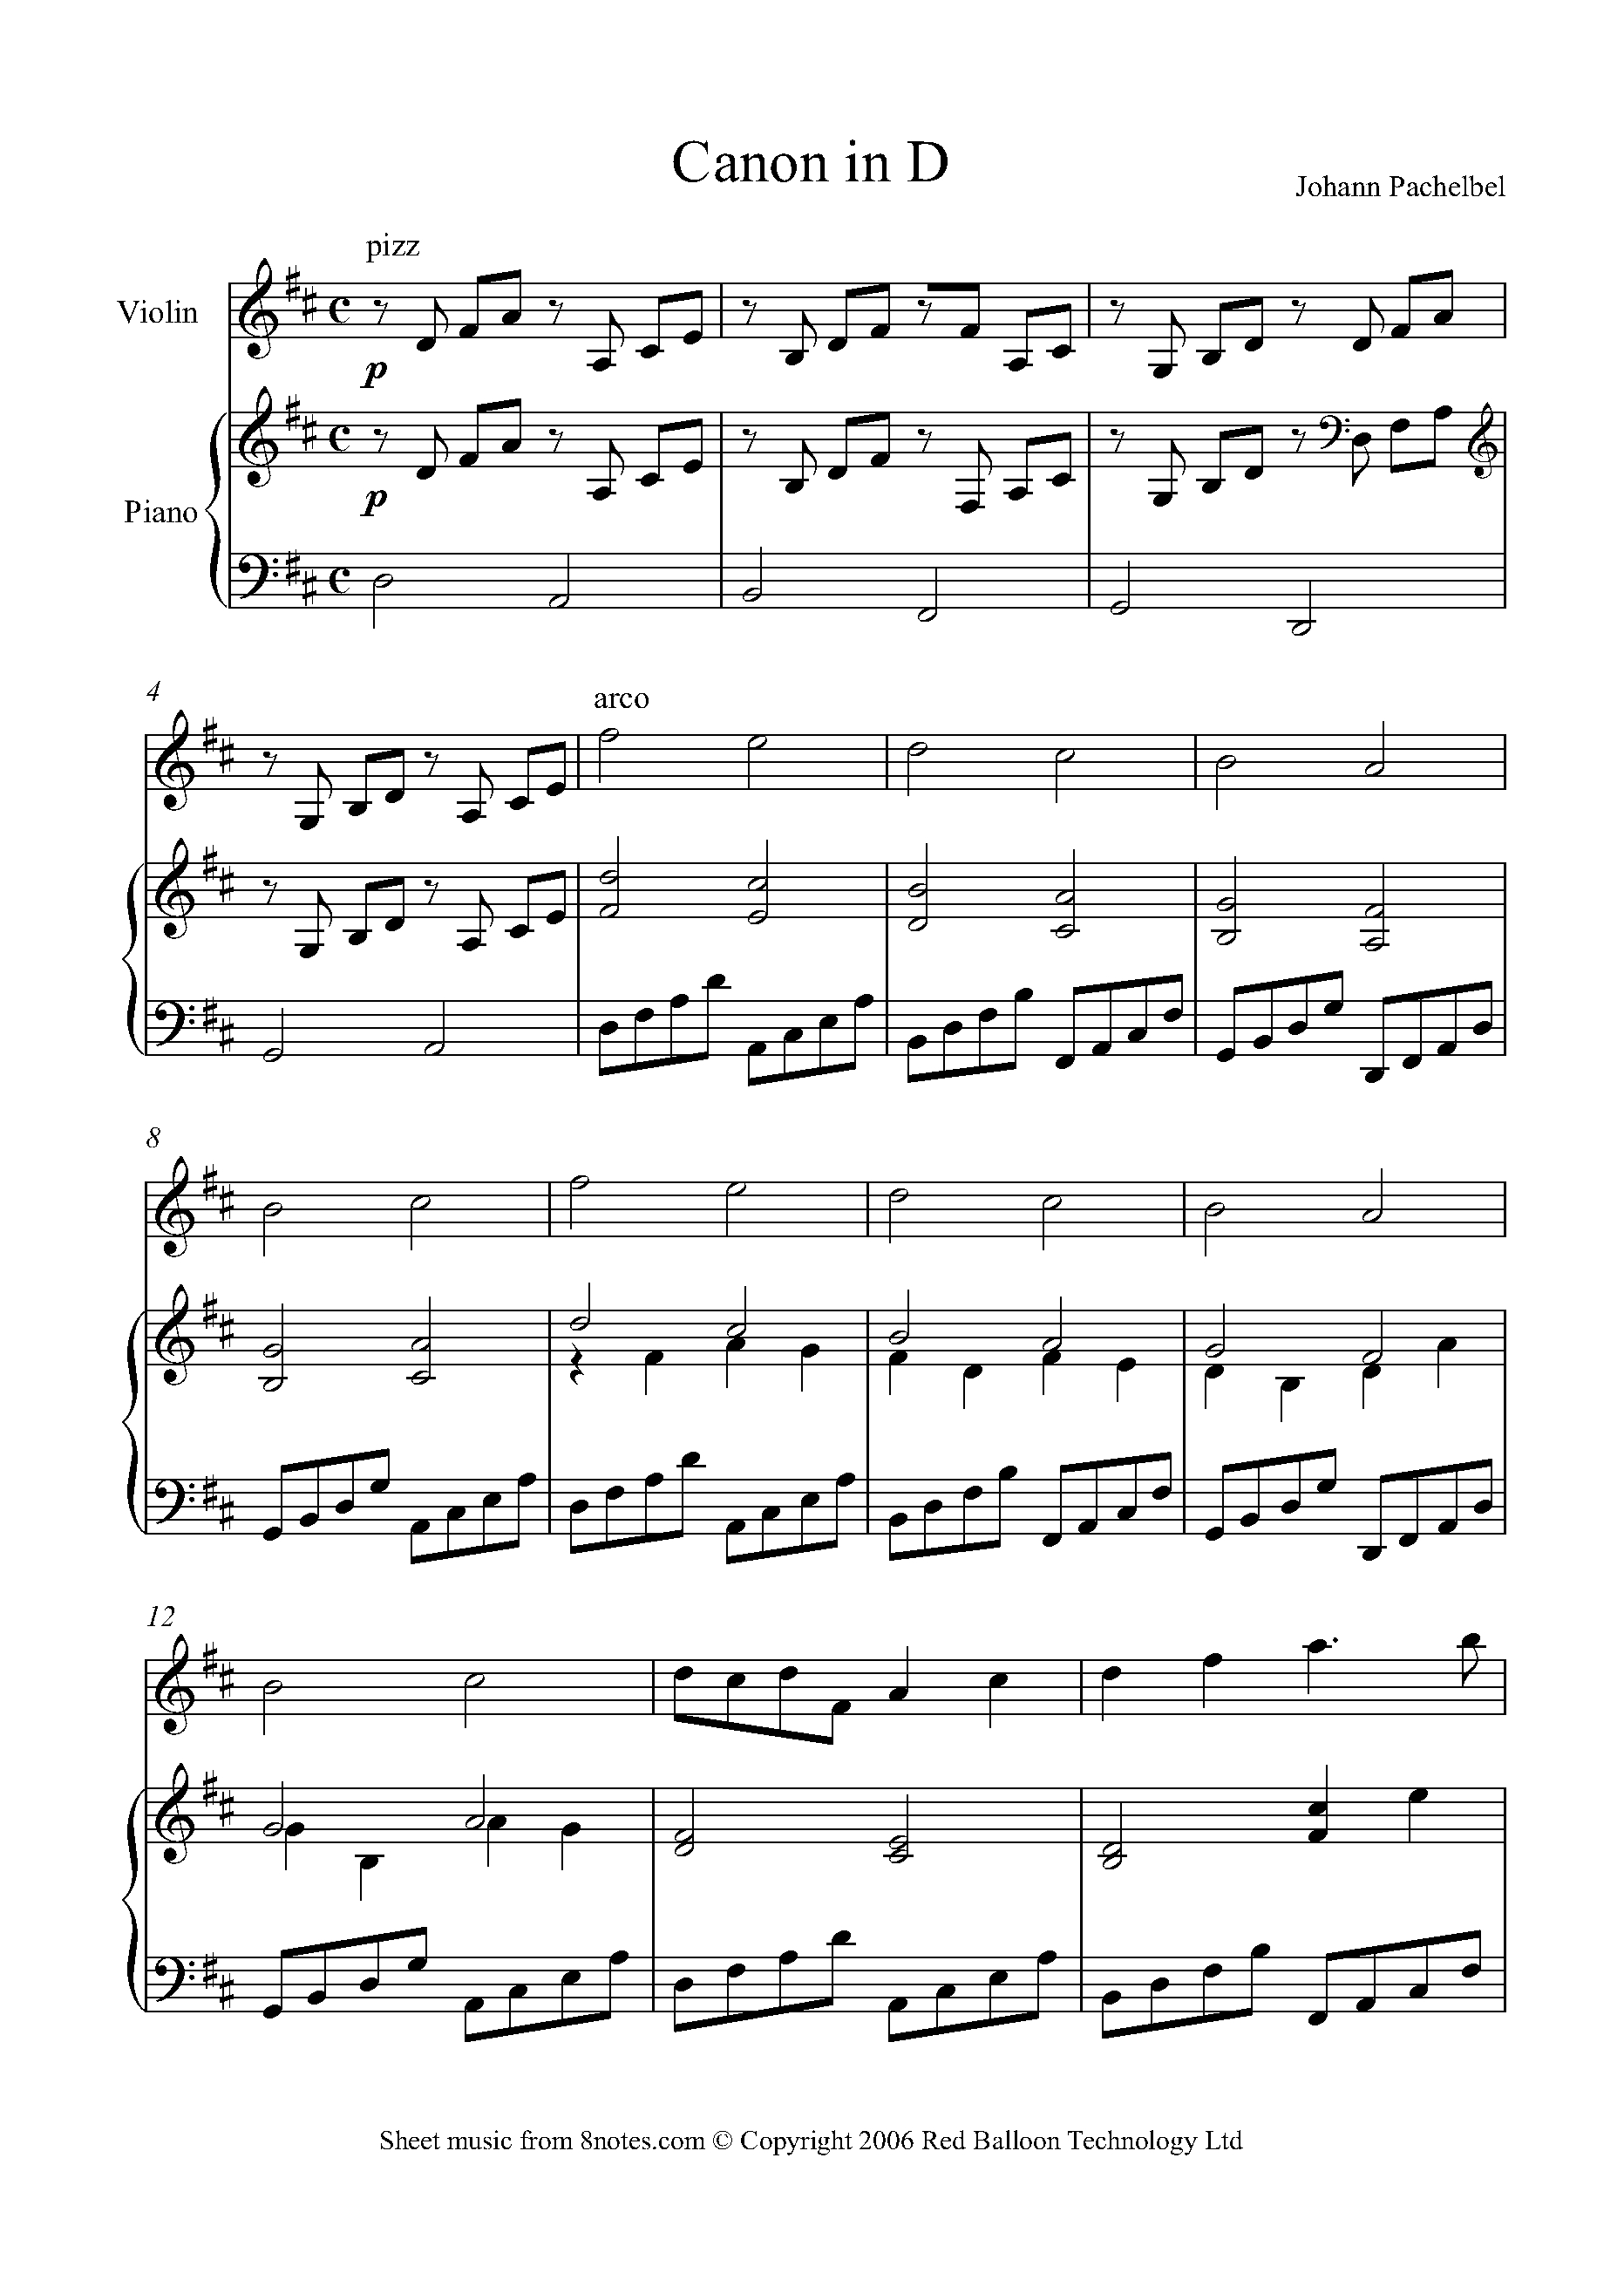 Pachelbel - Canon In D Sheet Music For Violin - 8Notes - Canon In D Piano Sheet Music Free Printable